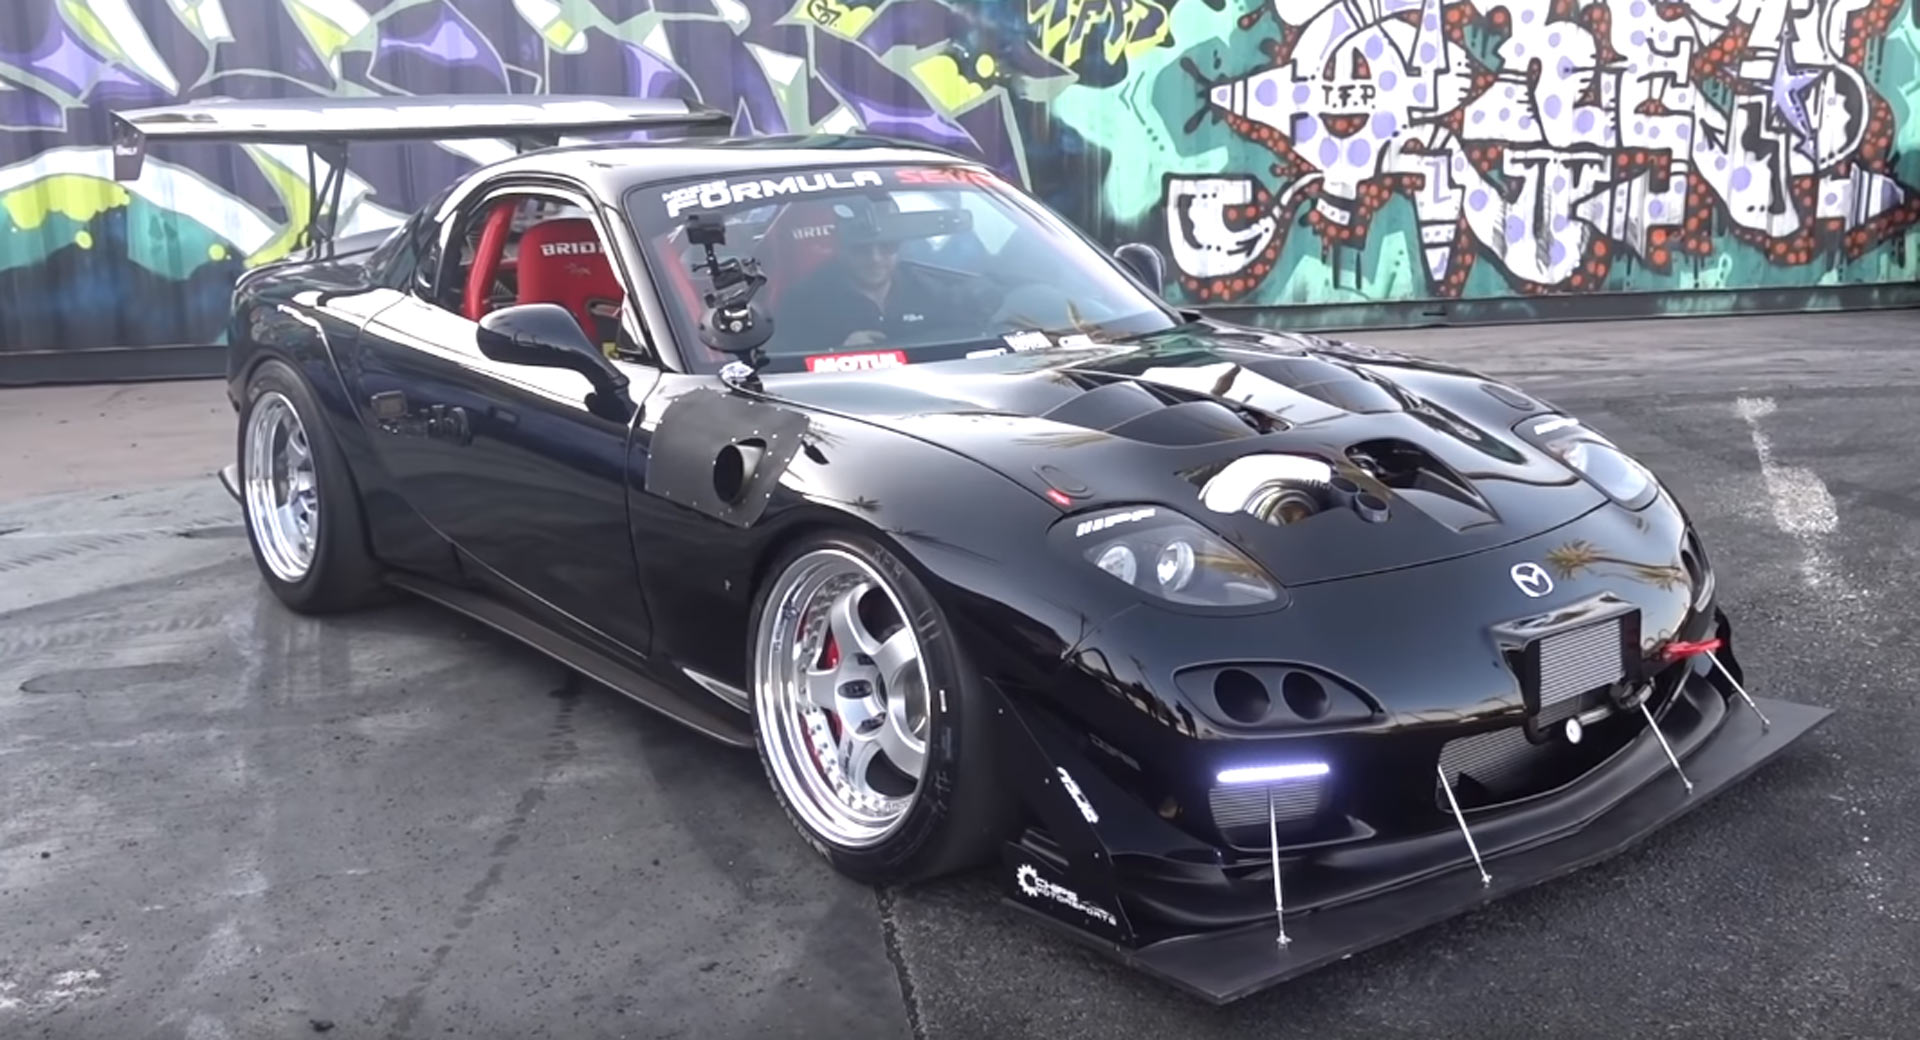 Turbo Four Rotor Mazda Rx 7 Has 1 000 Hp Sounds Absolutely Insane